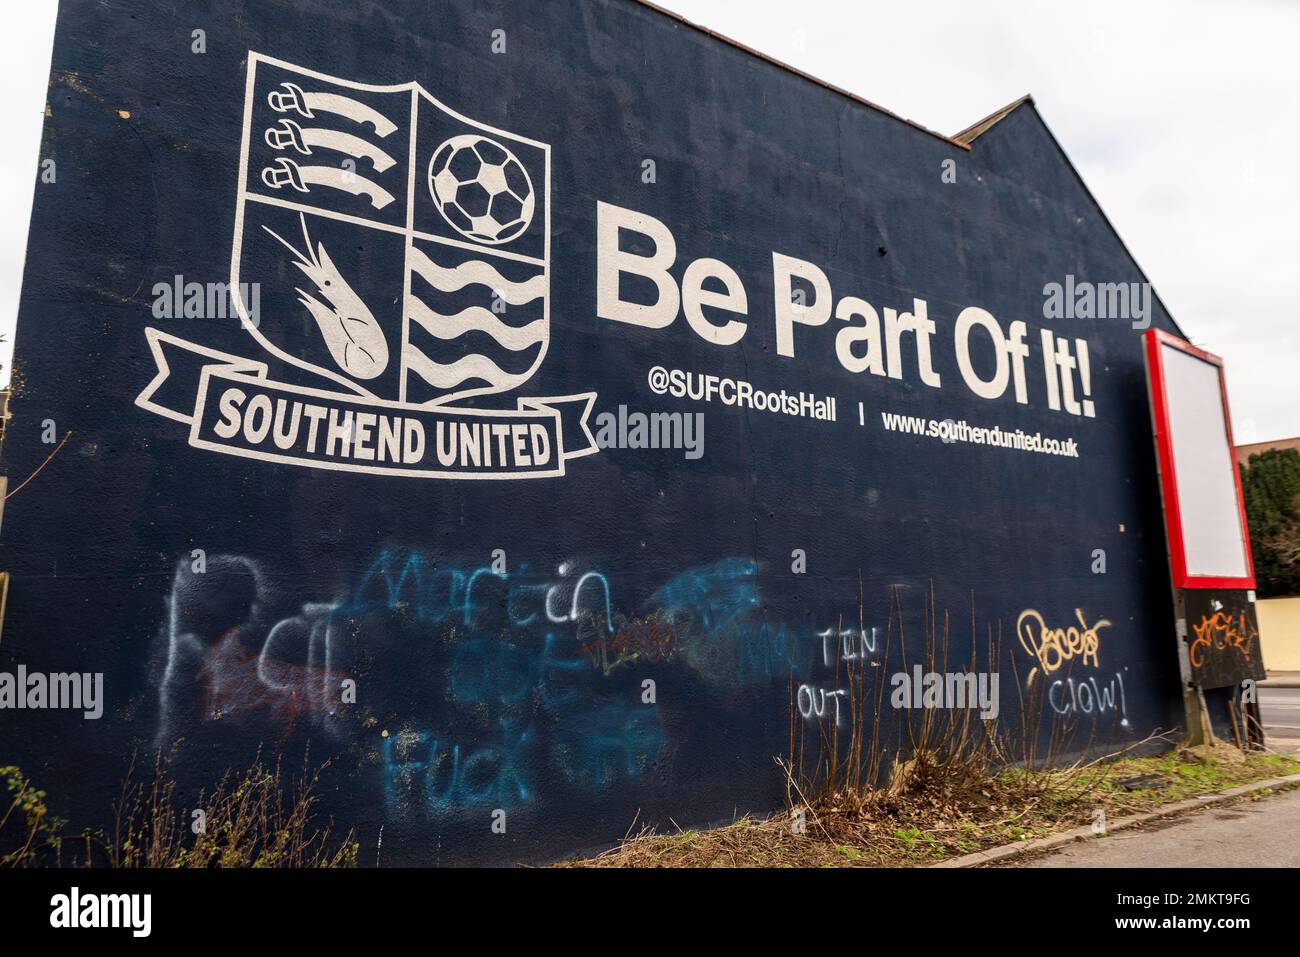 Badge, slogan at Roots Hall stadium of Southend Utd football ground, Southend on Sea, Essex, UK. Be part of it. Anti Ron Martin graffiti painted over Stock Photo